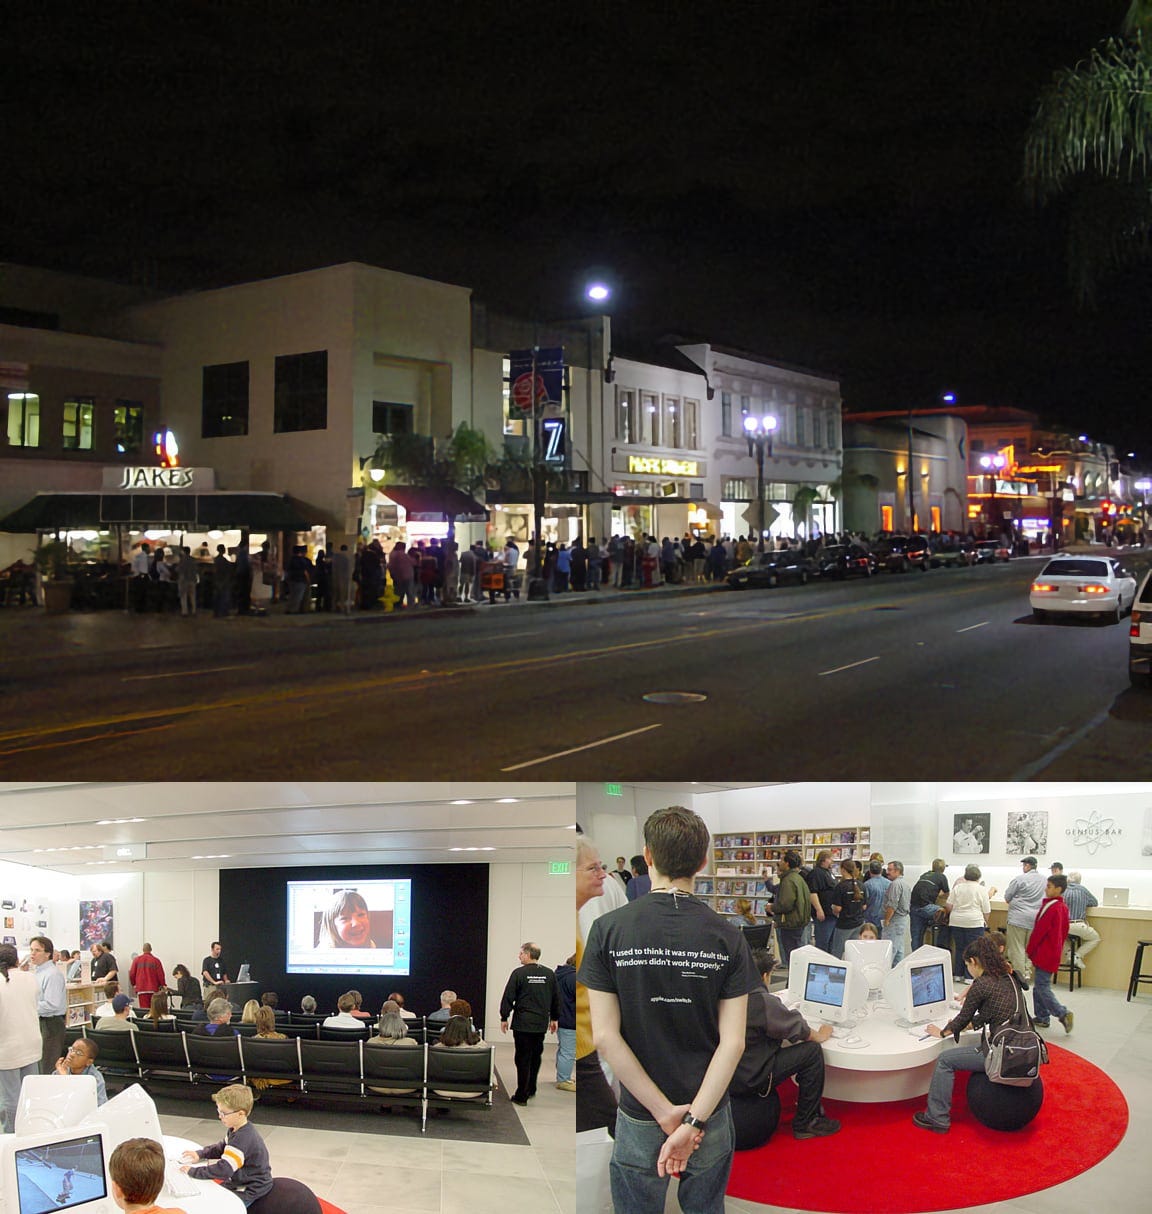 Three grand opening photos of Apple Pasadena depicting the outdoor queue, Theater seating inside, and kids area.